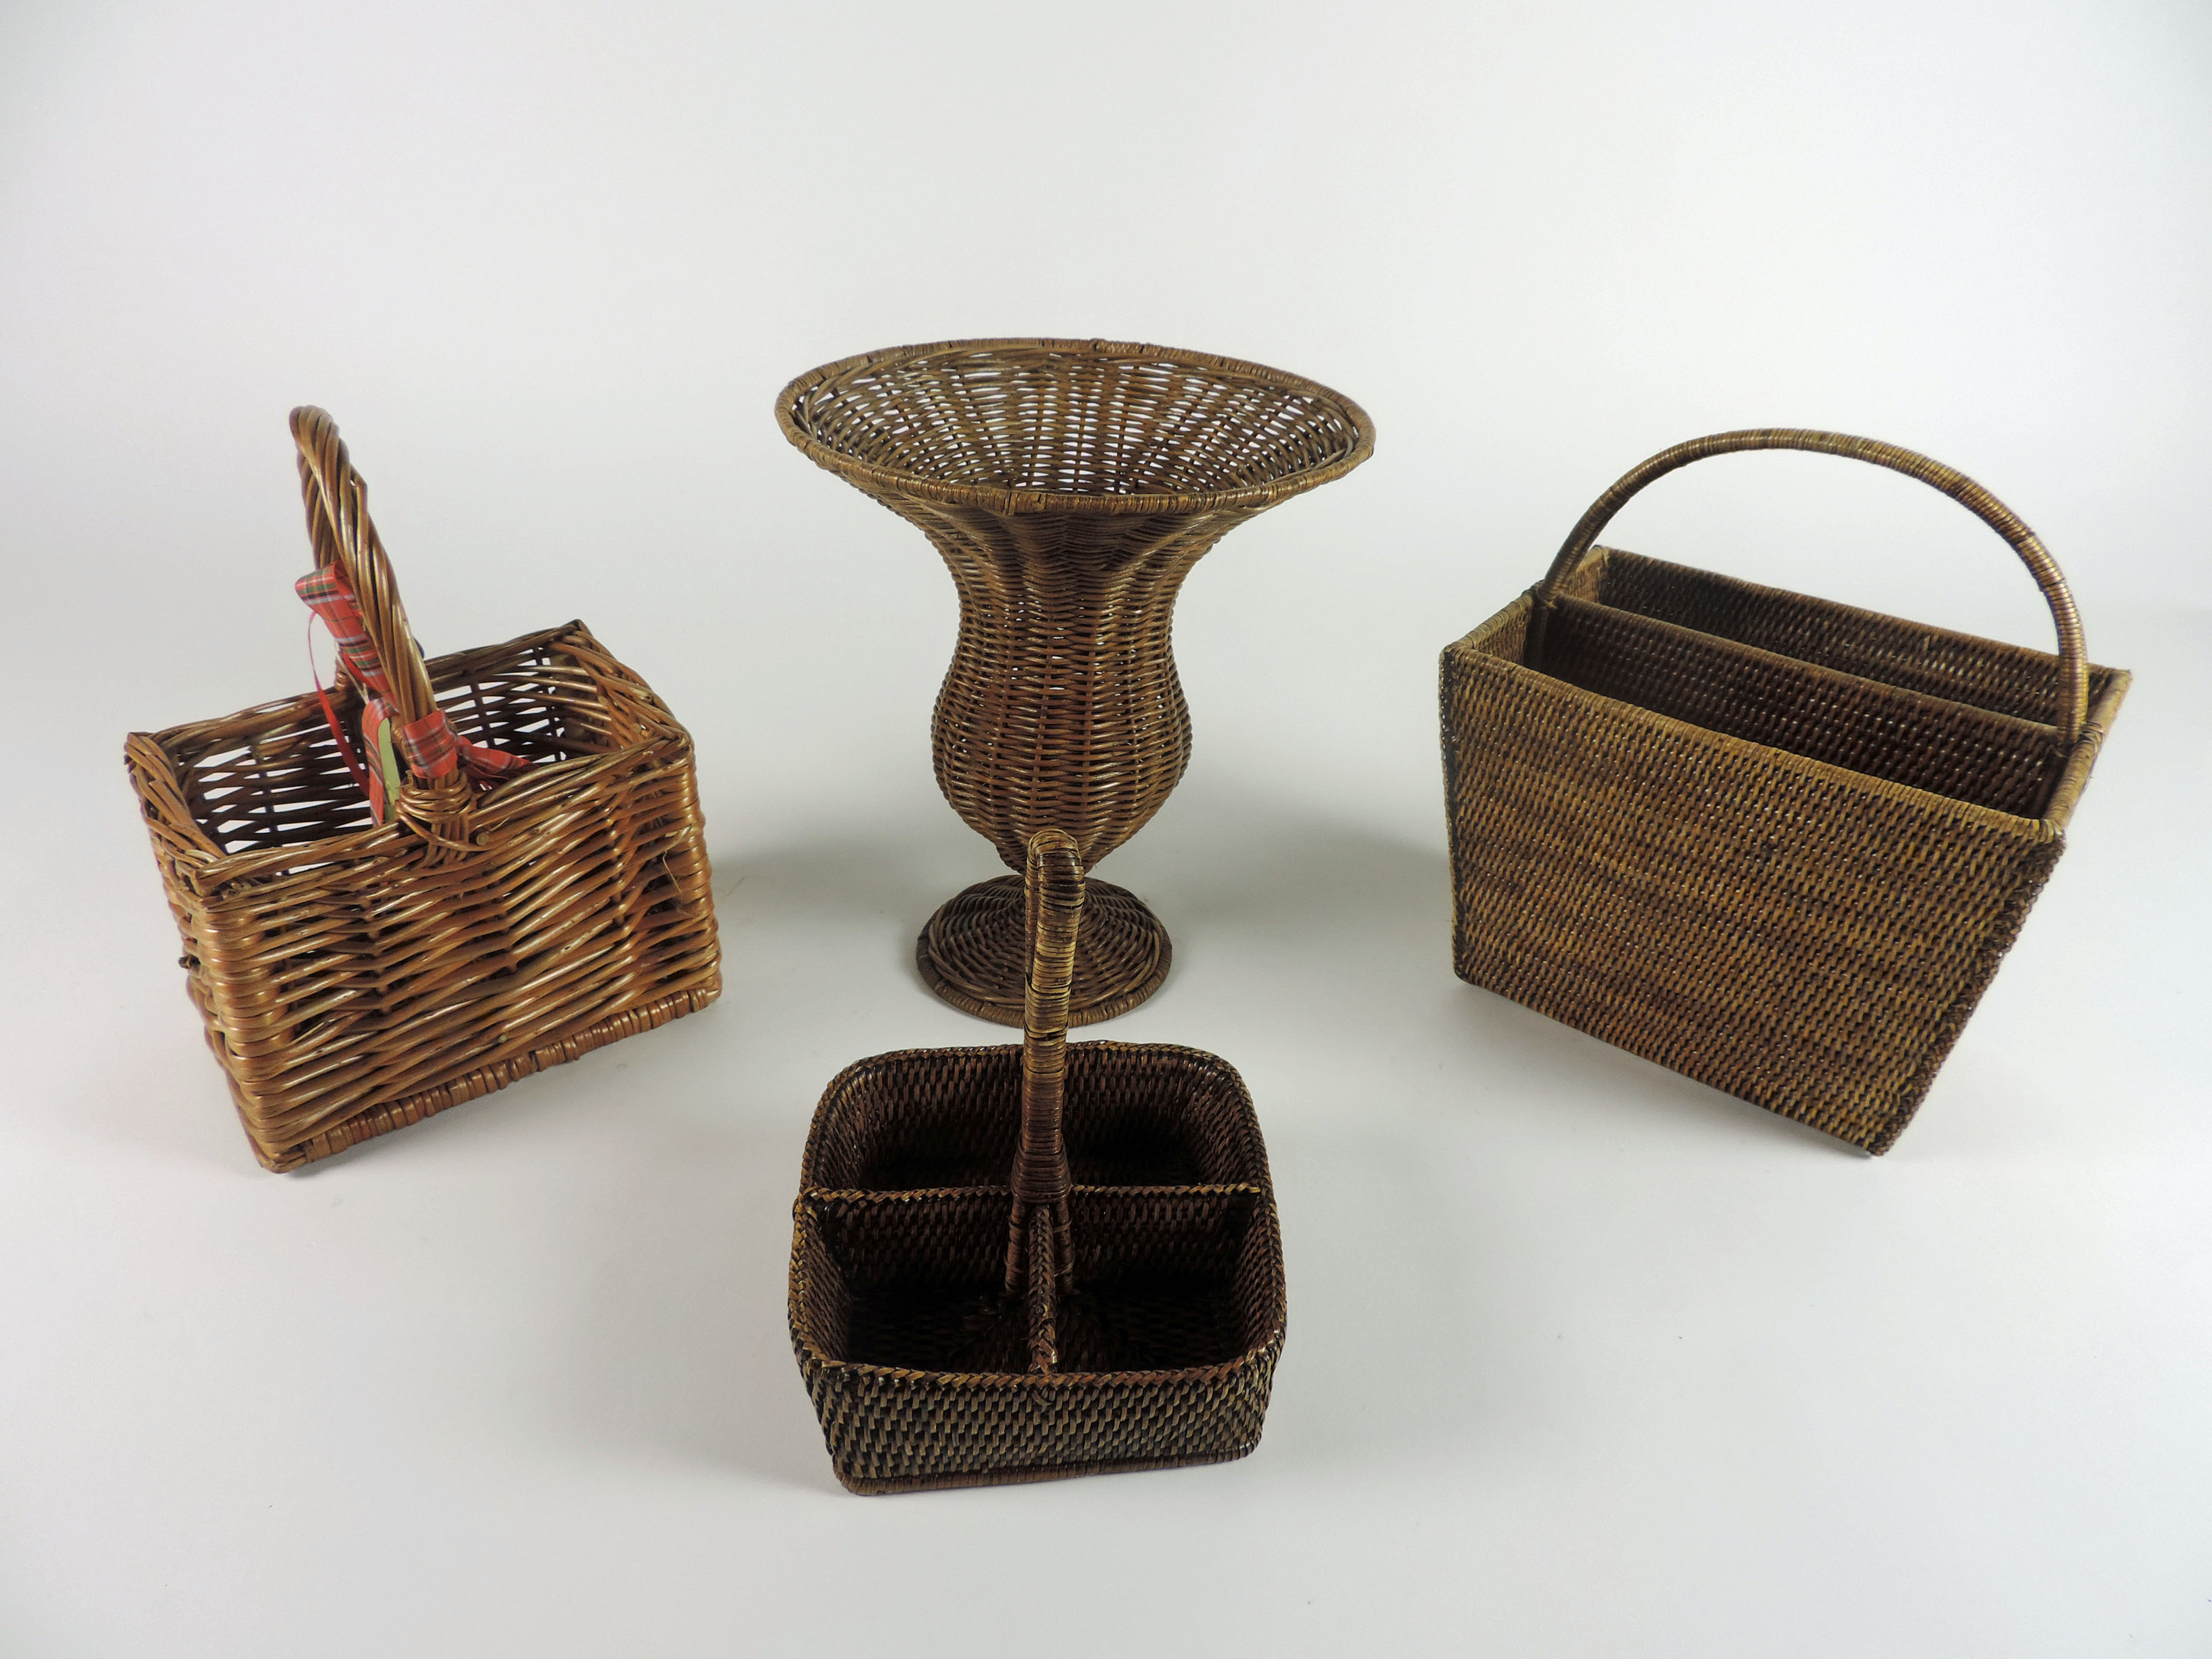 A collection of good Wicker-Work items, including two tier table, a coffee table, some baskets etc.,